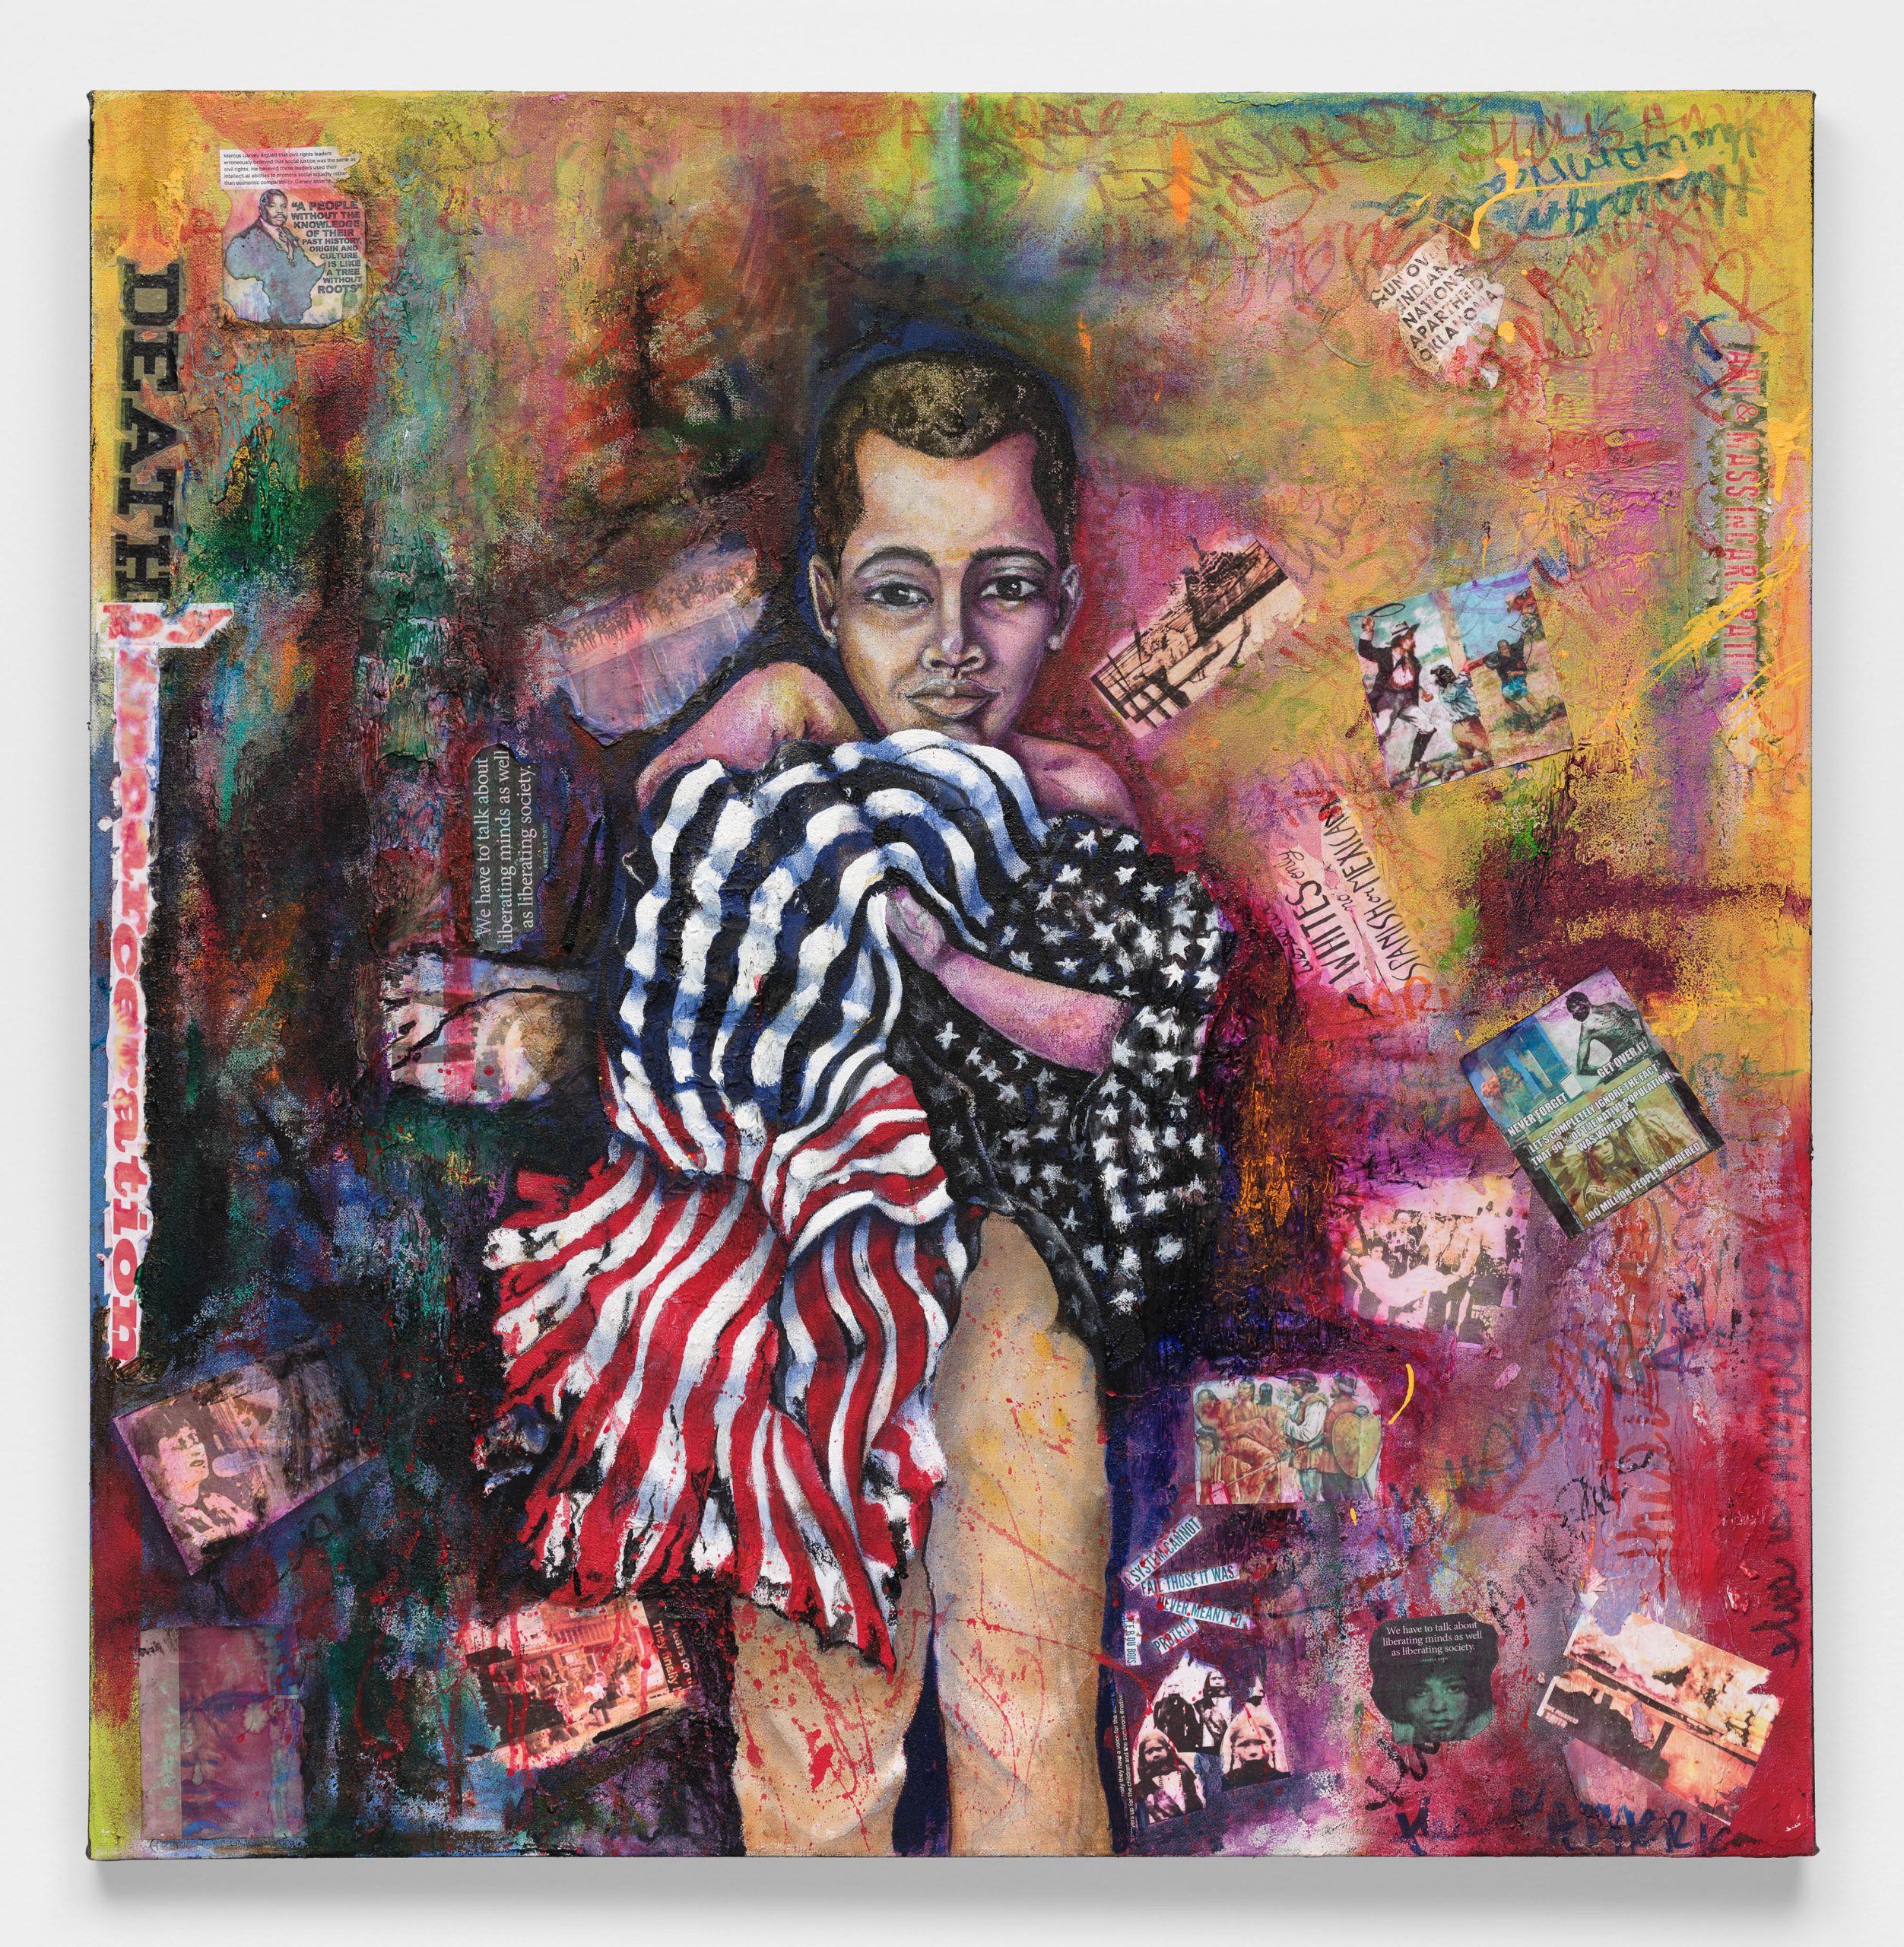 A boy with brown skin wrapped in an American flag stained with blood against a colorful backdrop with text and images about racist violence in America, in mixed media.